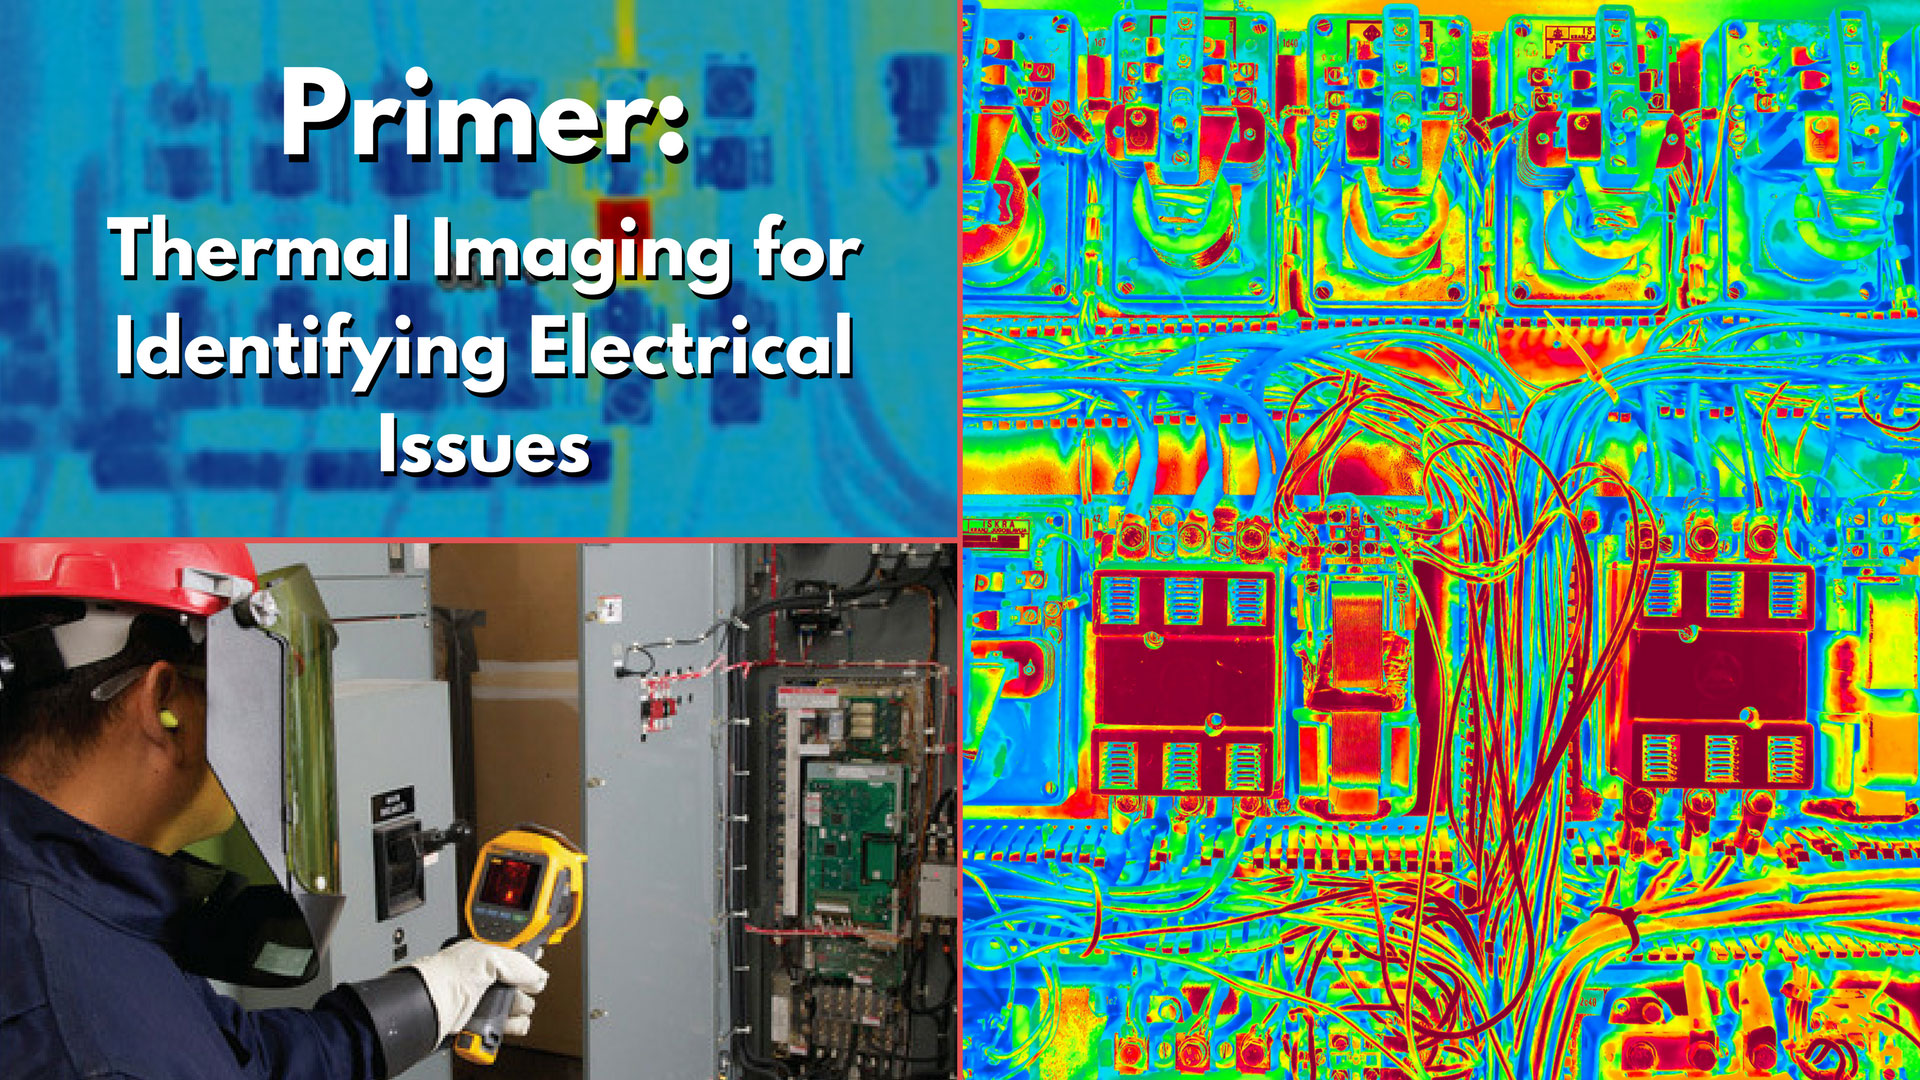 Thermal imaging camera inspection for temperature check and